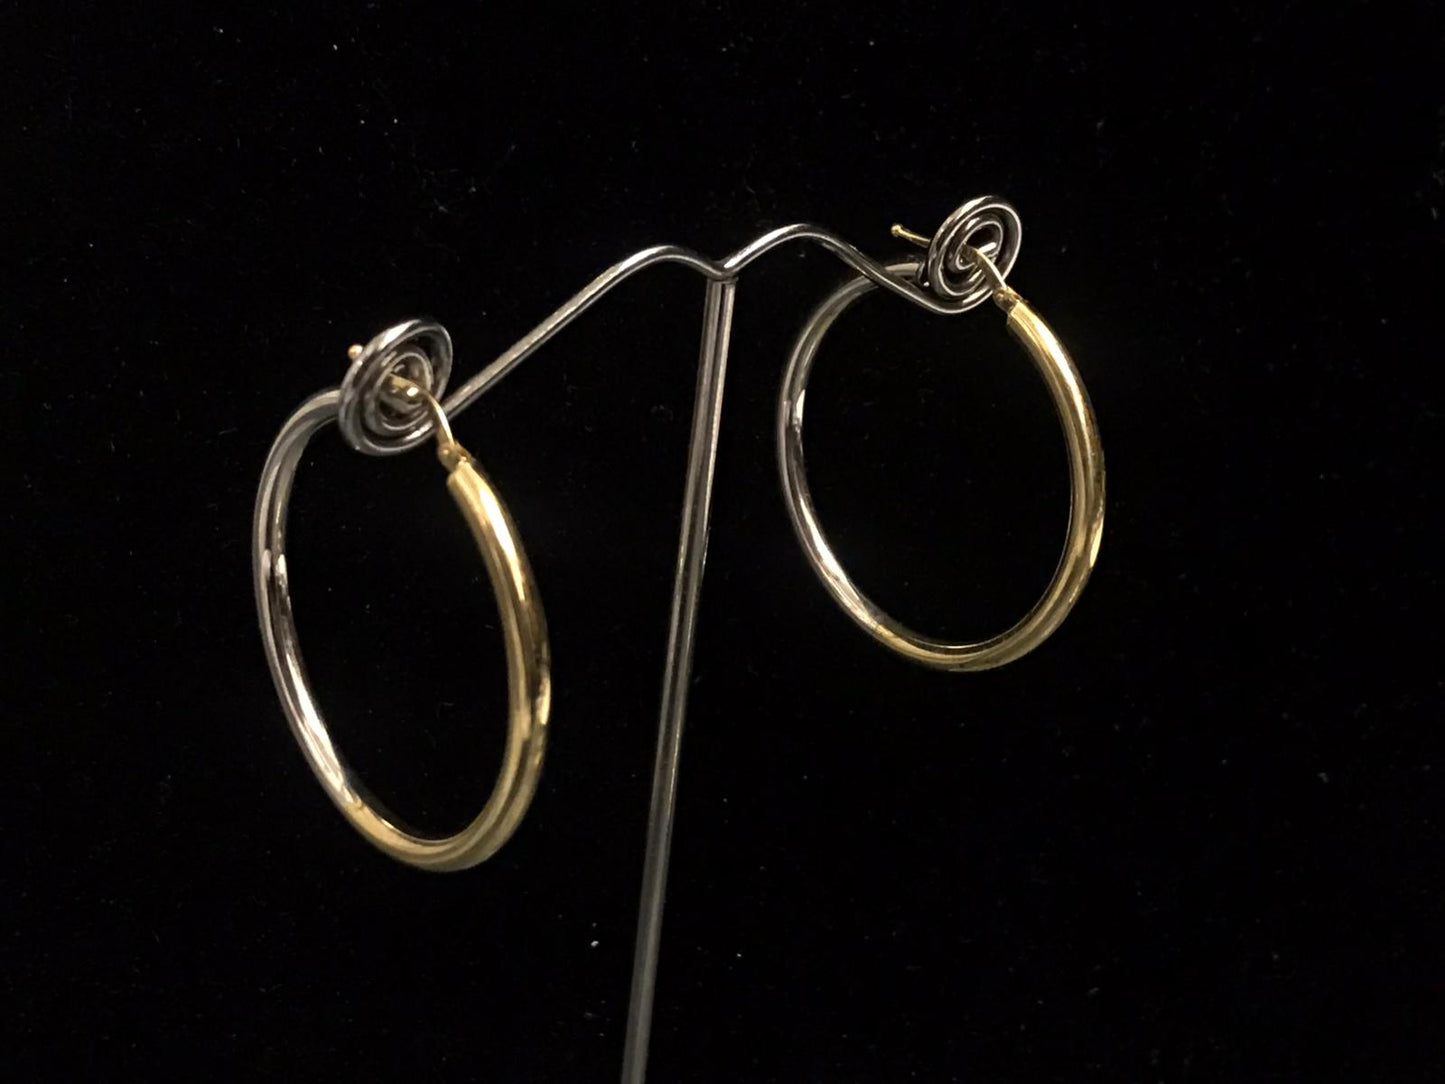 10Kt White and Yellow Gold Earrings 4144